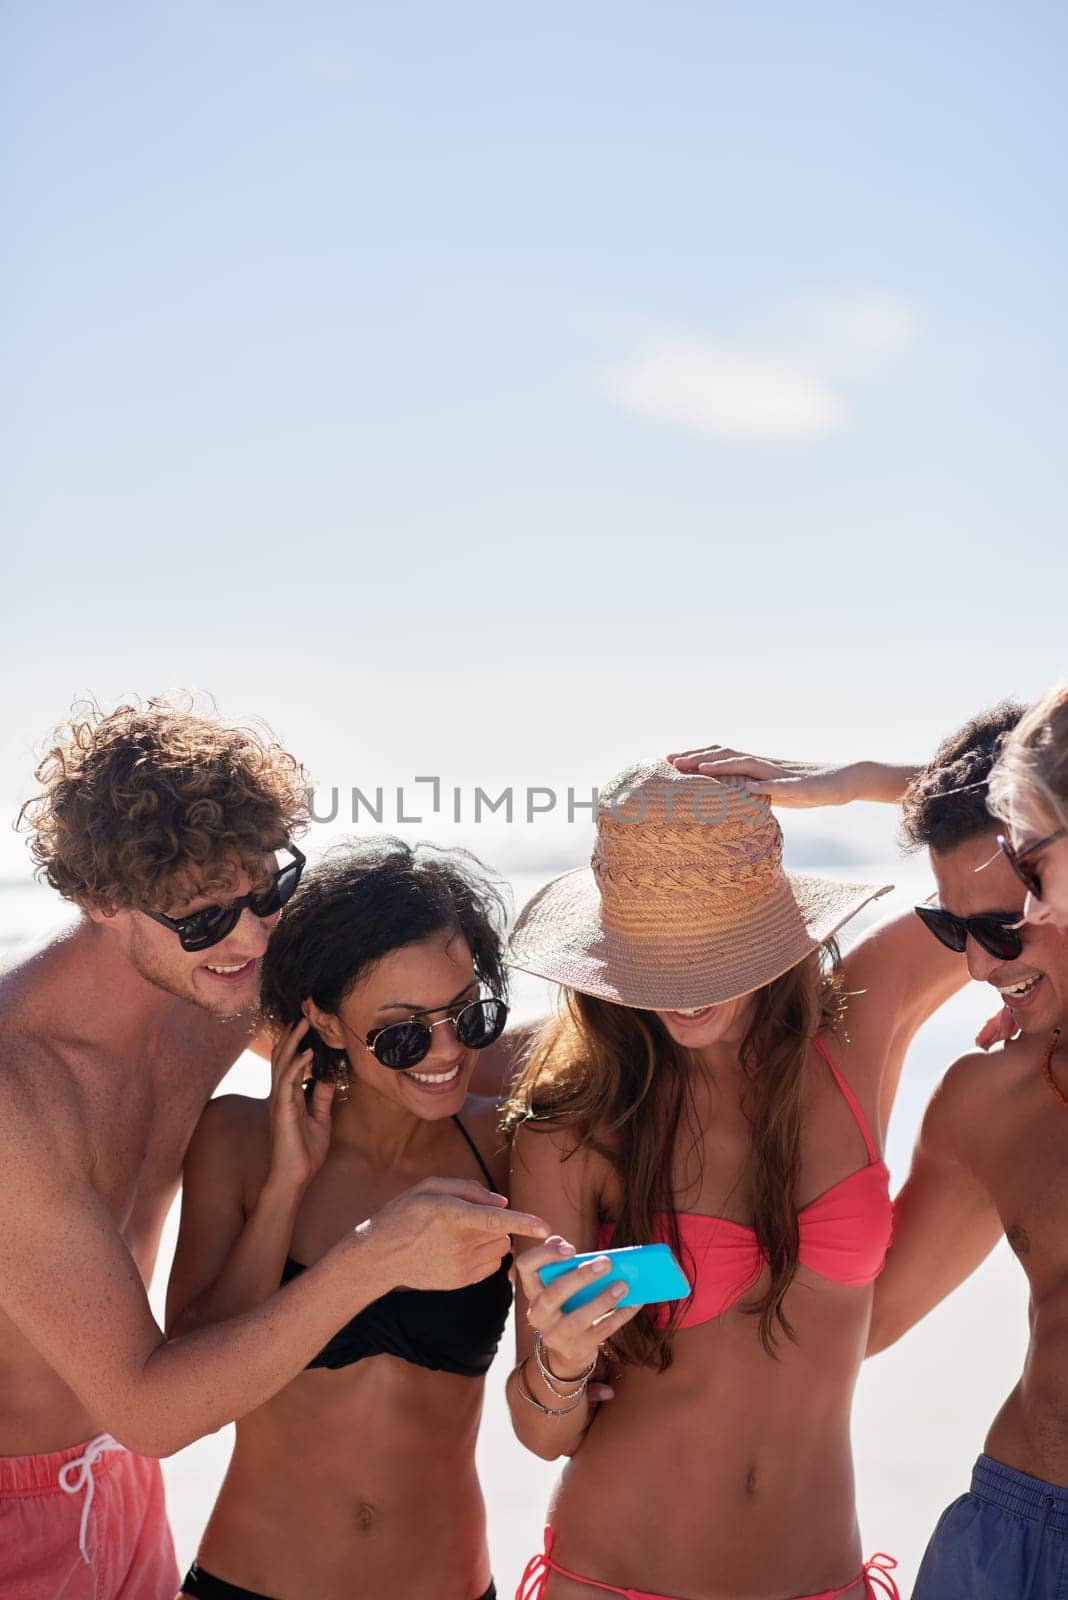 Social media, freedom and friends on the beach with a phone to post a status update while on vacation together. Mobile, summer and a group of young people outdoor in nature for holiday travel.